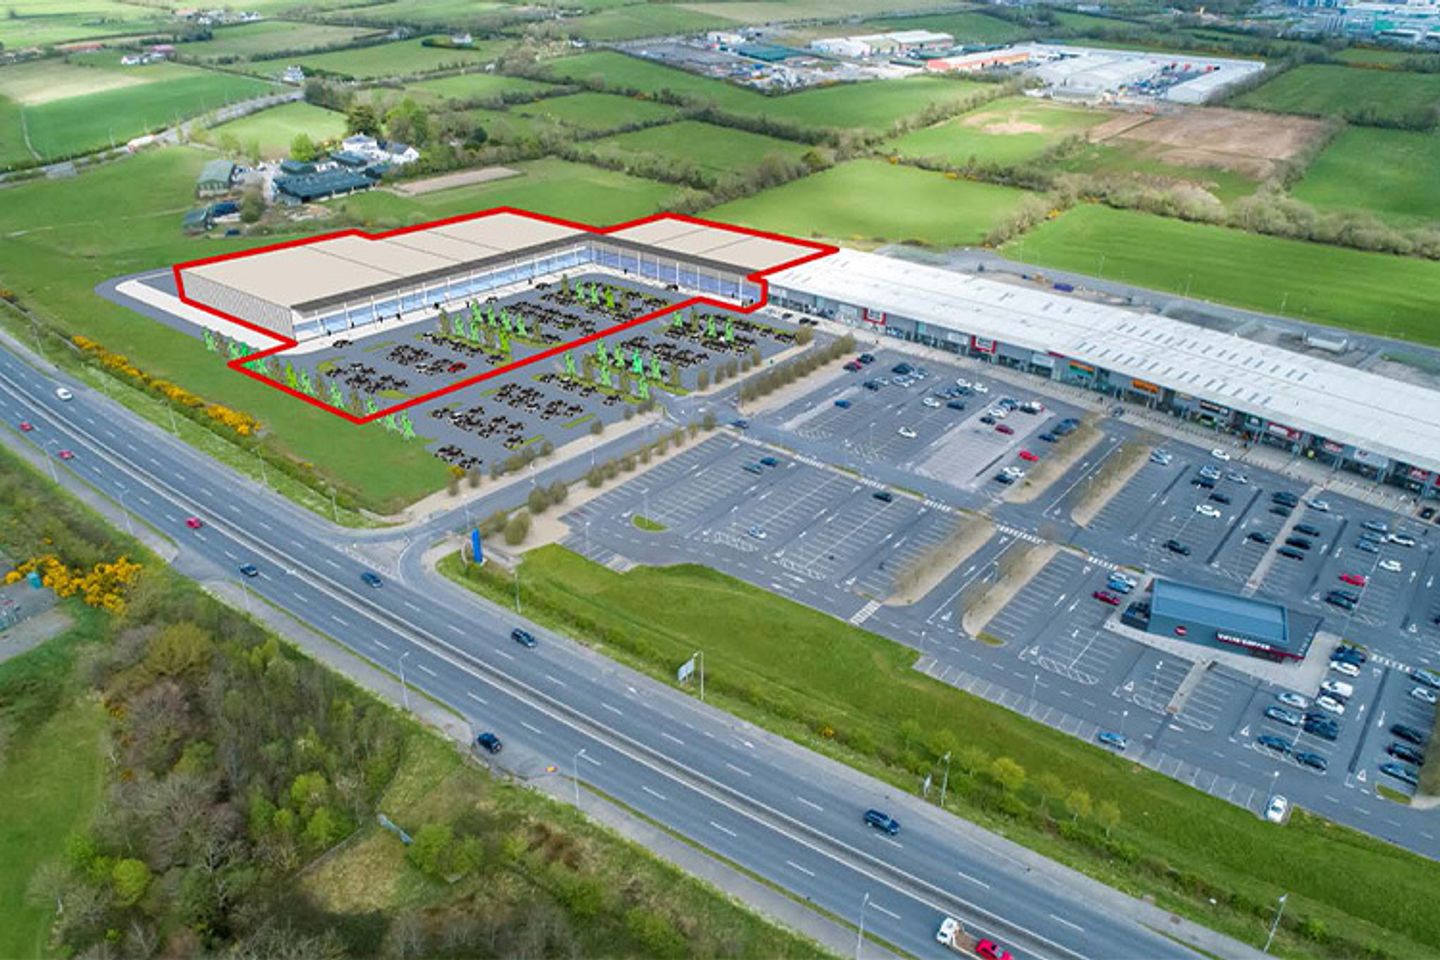 Waterford Retail Park, Butlerstown, Co. Waterford